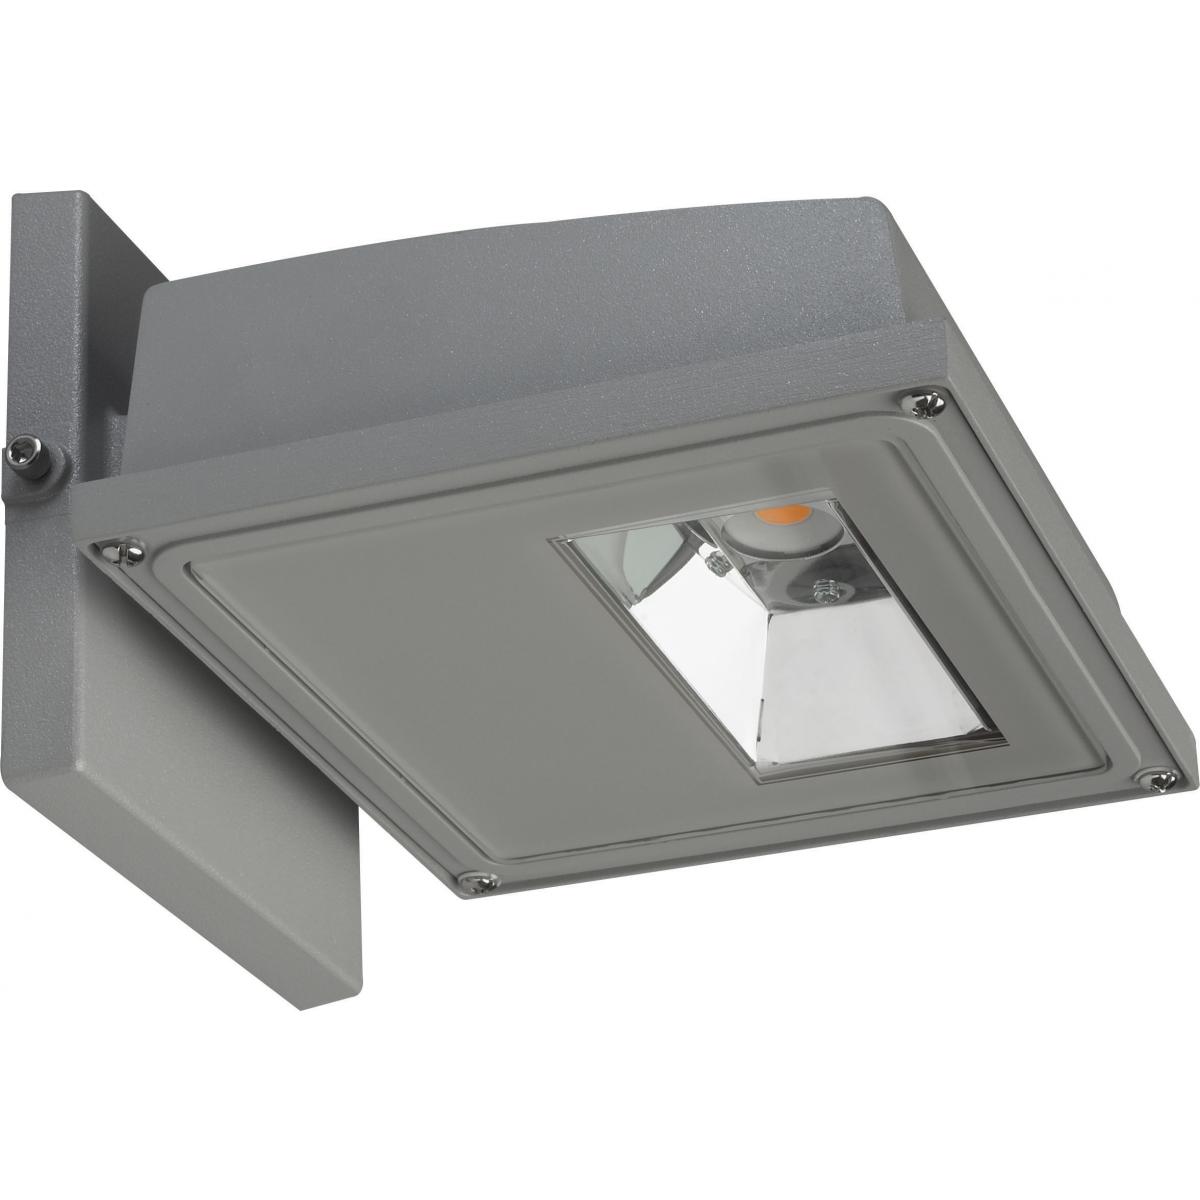 65-151 11W LED WALL PACK GRAY 3000K